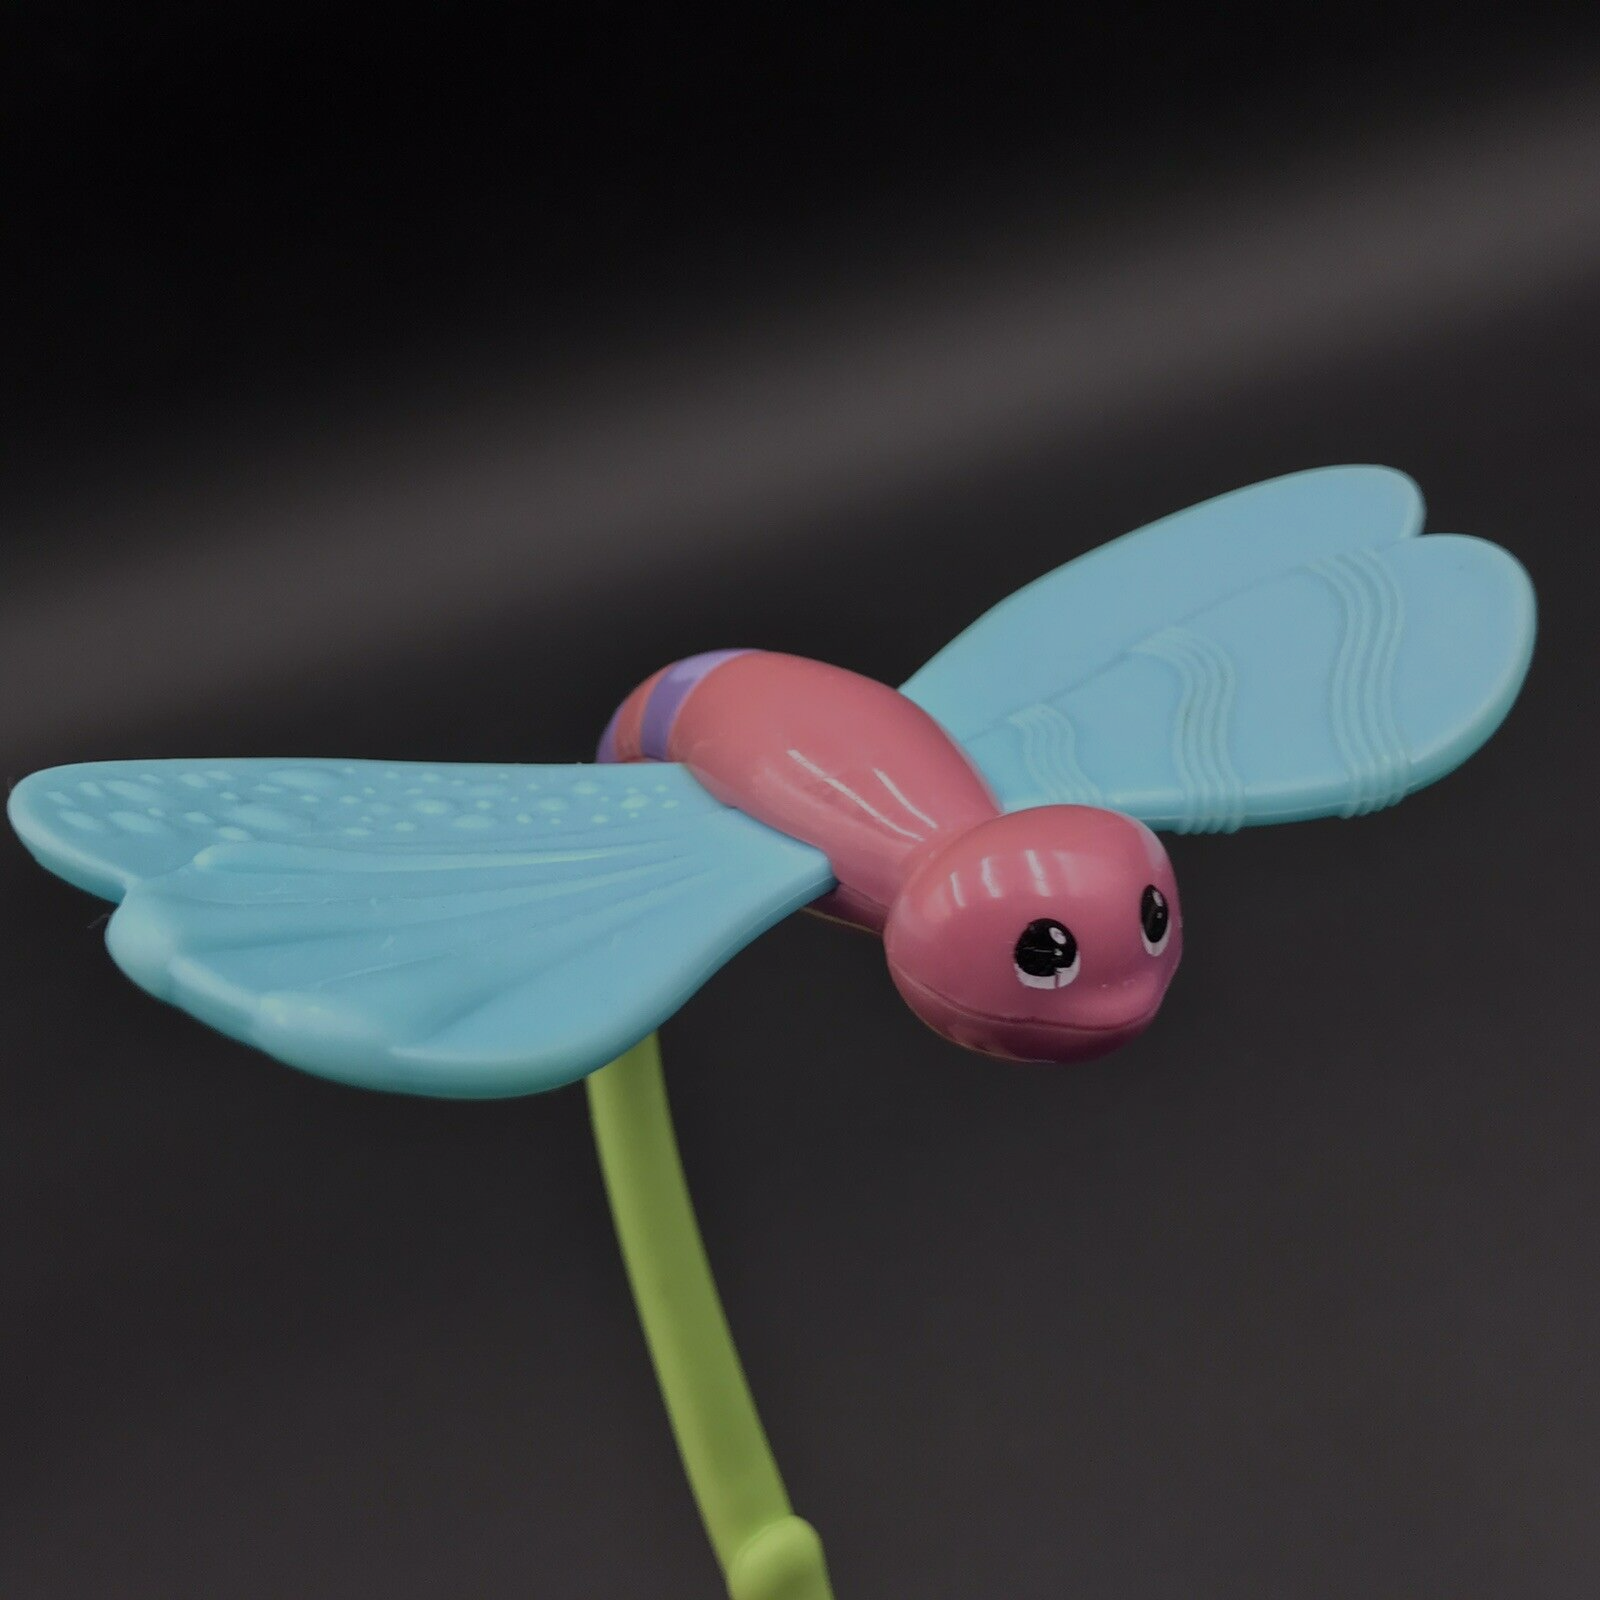 Evenflo Exersaucer Replacement Toy Dragonfly Teether Life in the Amazon - $9.99